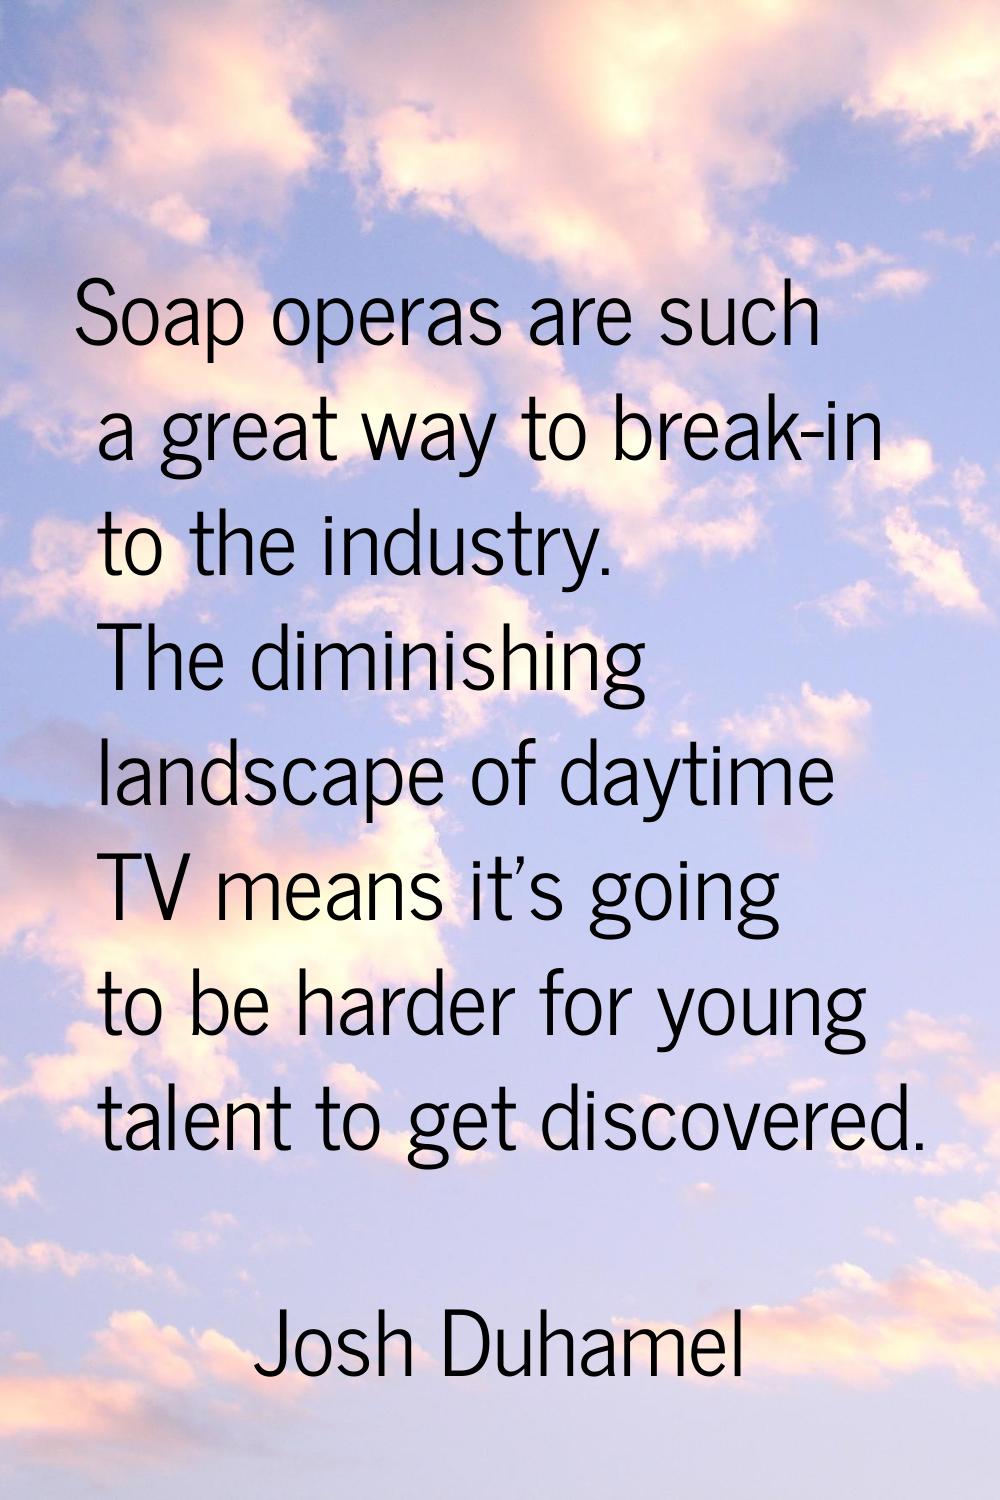 Soap operas are such a great way to break-in to the industry. The diminishing landscape of daytime 